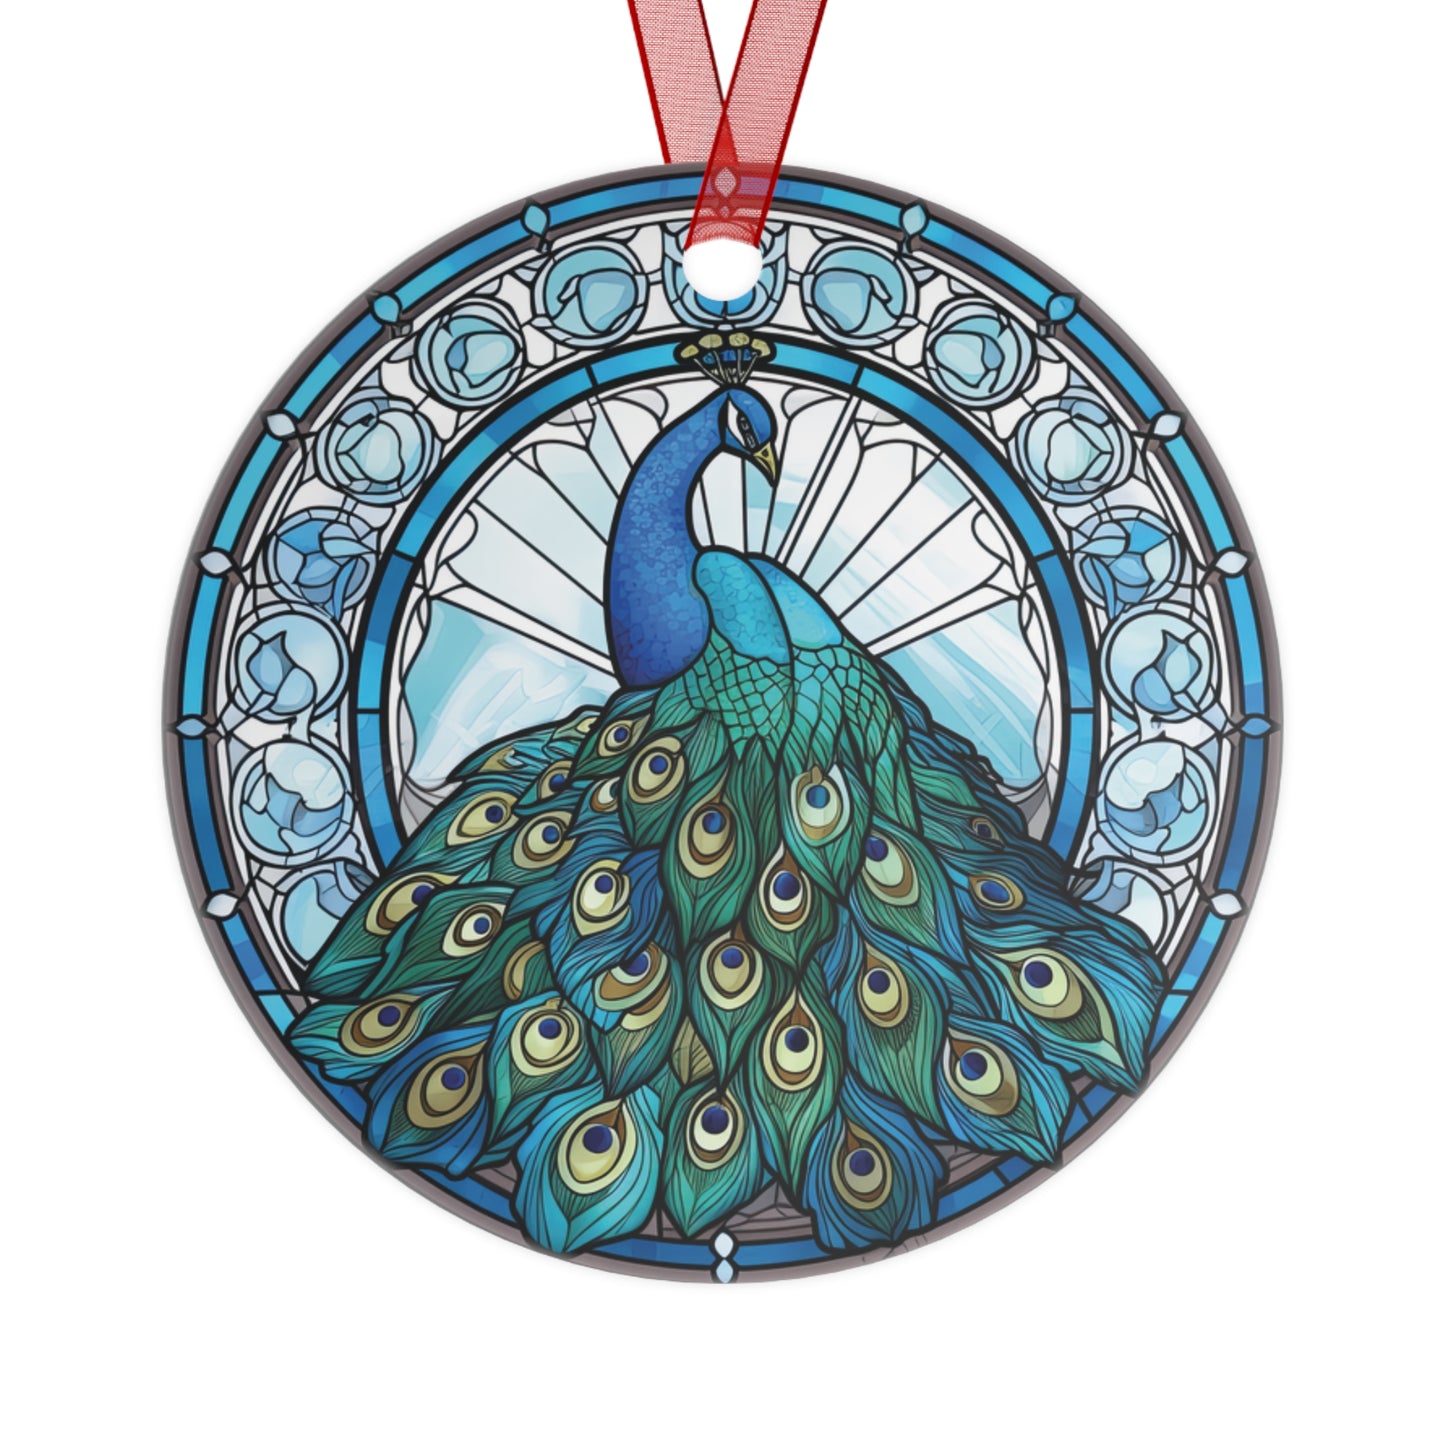 Peacock Ornament Stained Glass Style Ornament Lightweight Shaterproof Metal Ornaments Christmas Ornament Exchange Christmas Peacock Feathers